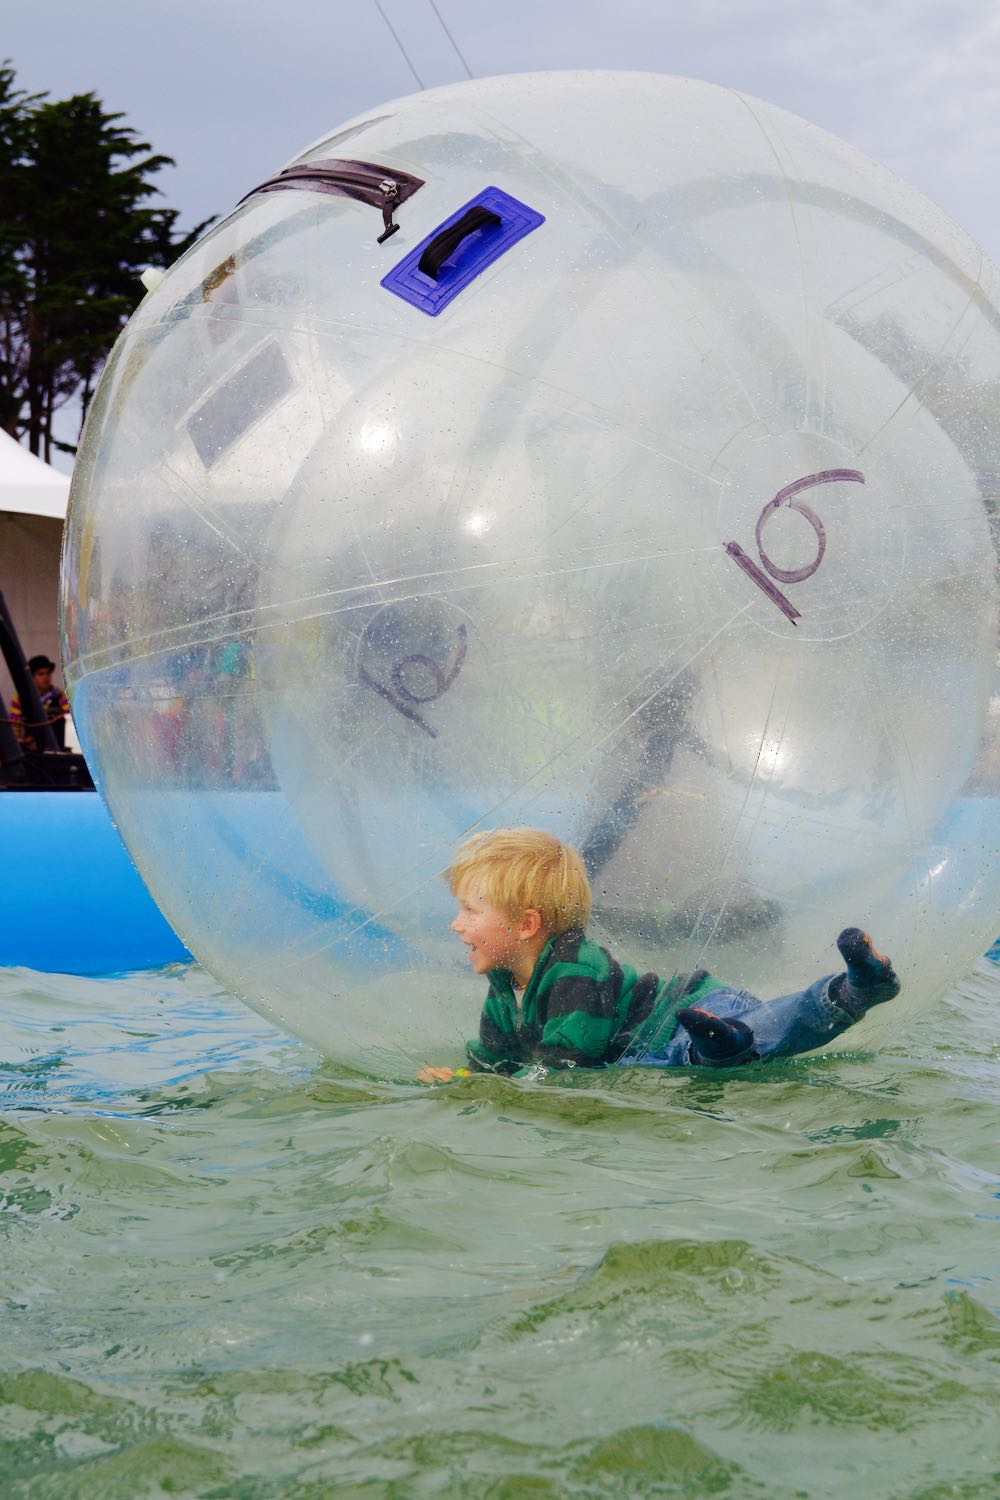 In a rolling water ball at a fair